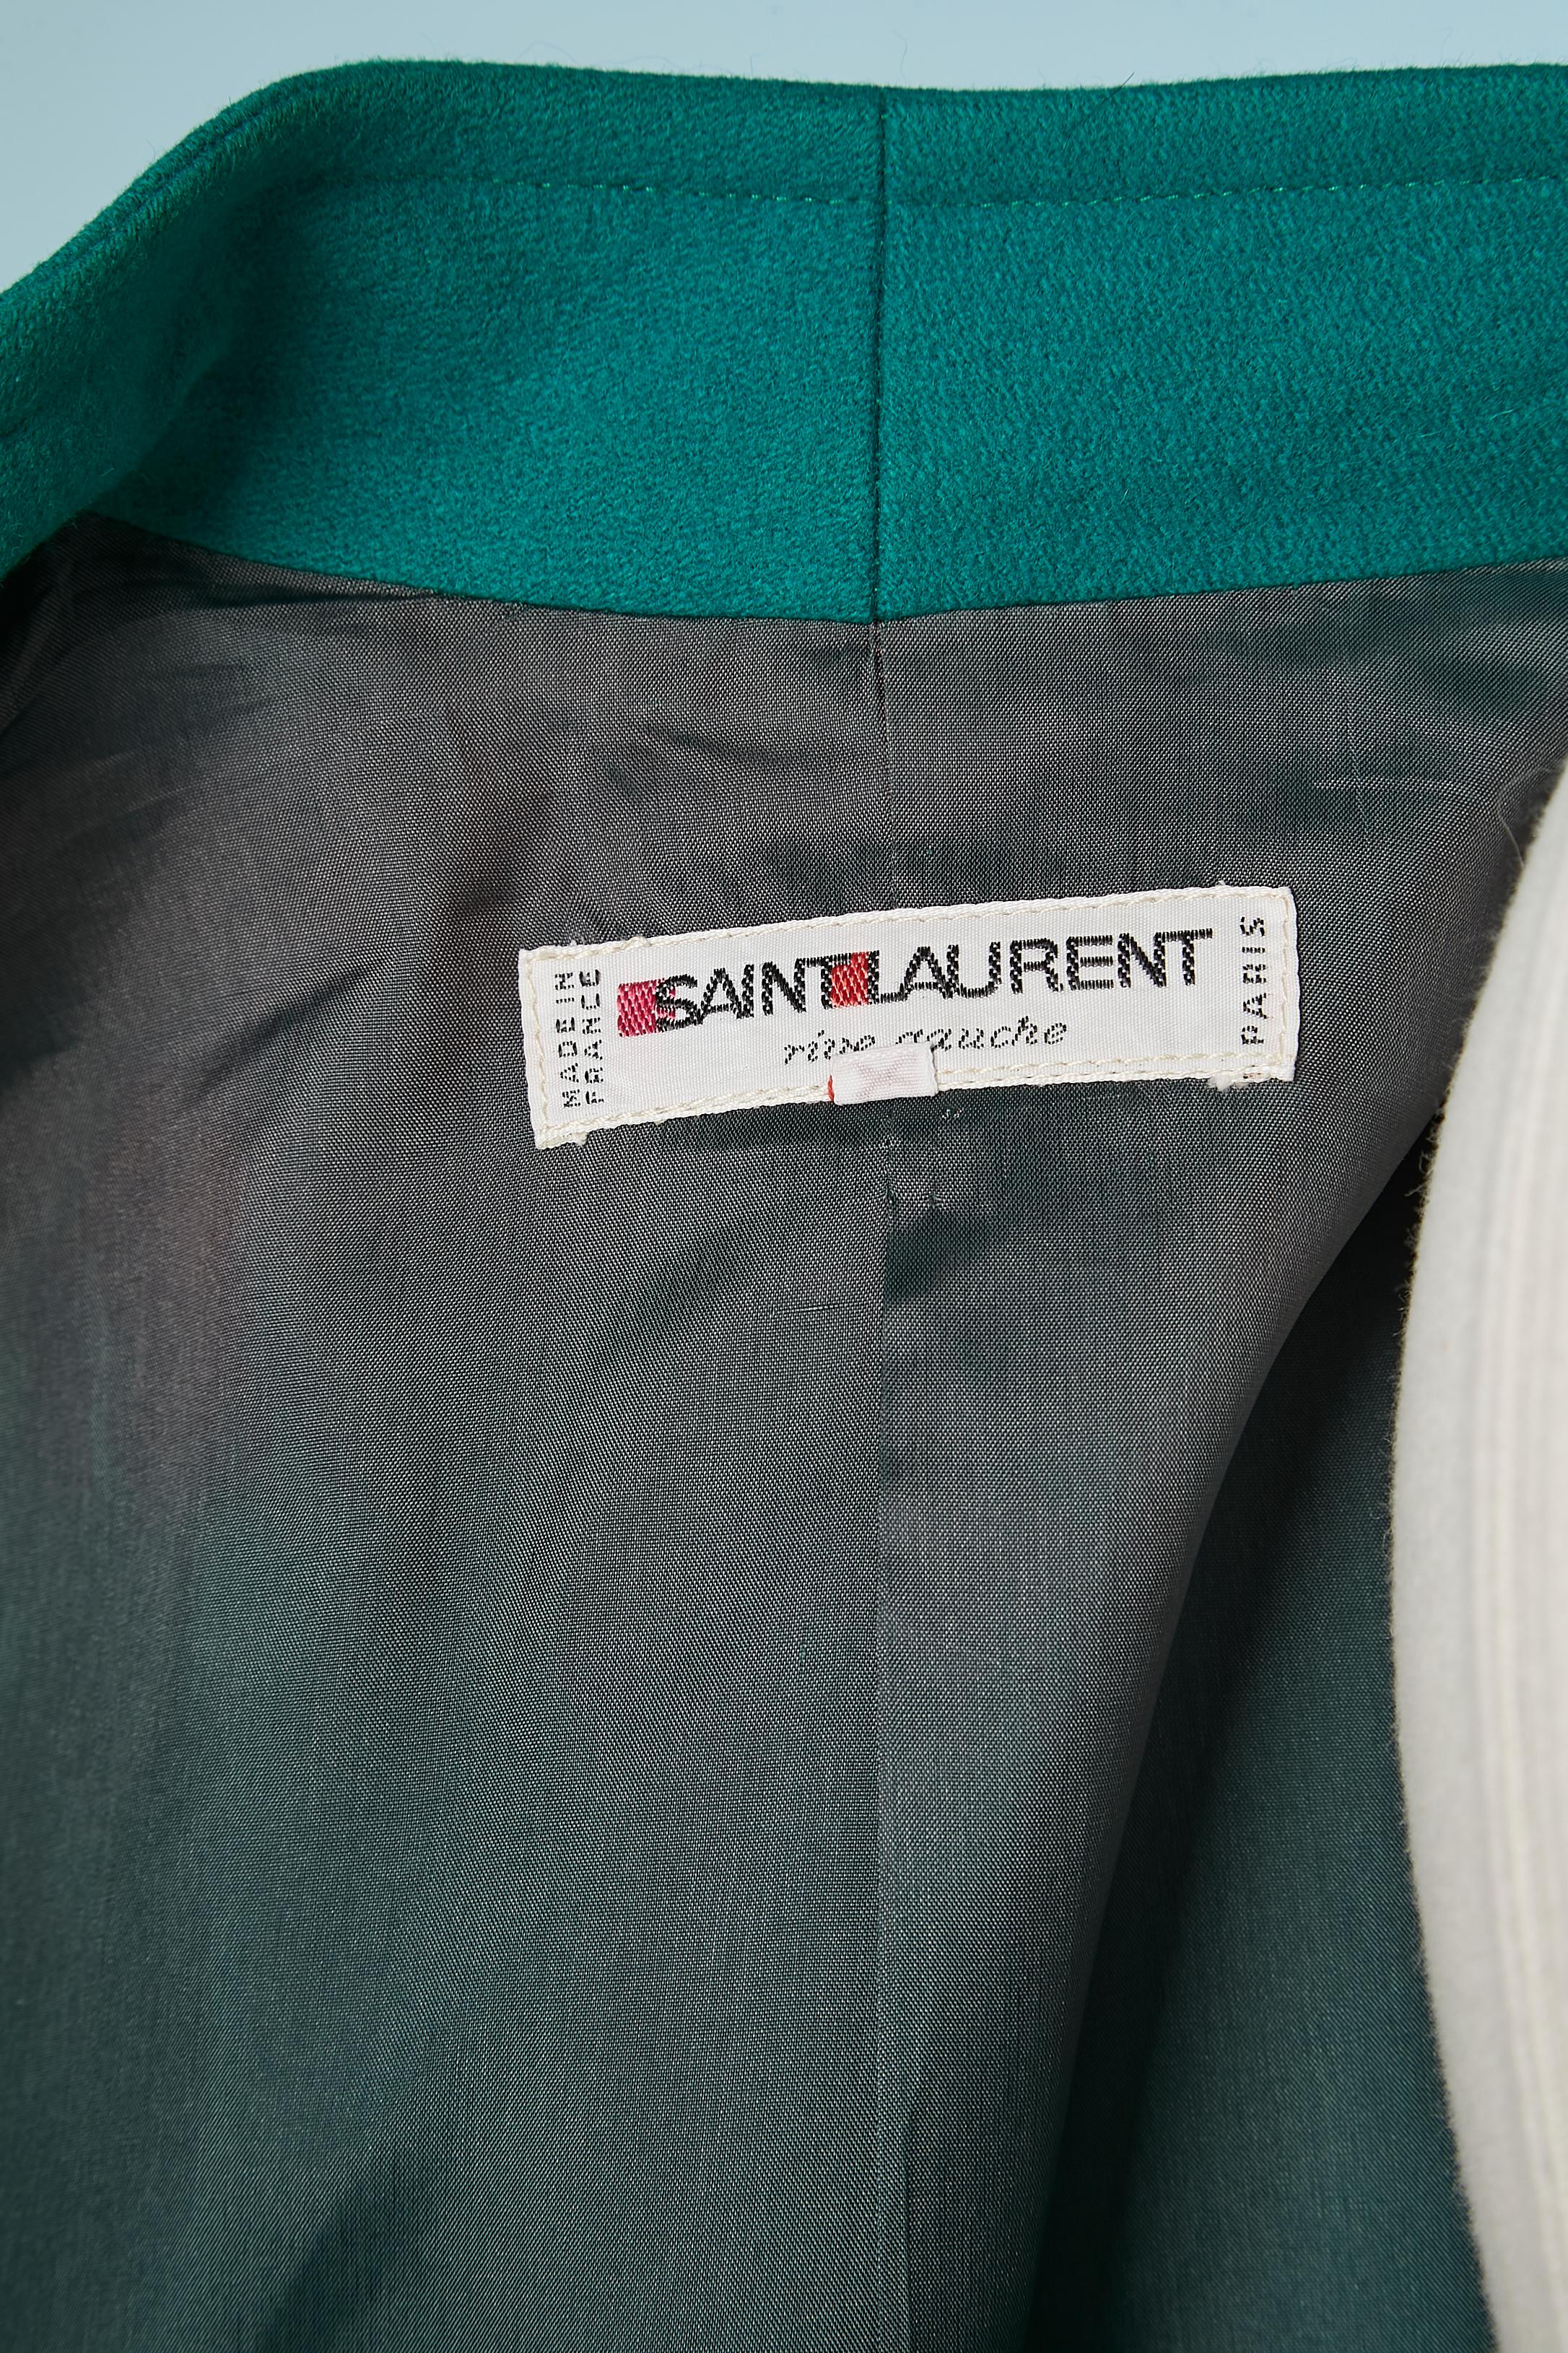 Green wool skirt-suit with graphic collar Saint Laurent Rive Gauche Circa 1980's For Sale 4